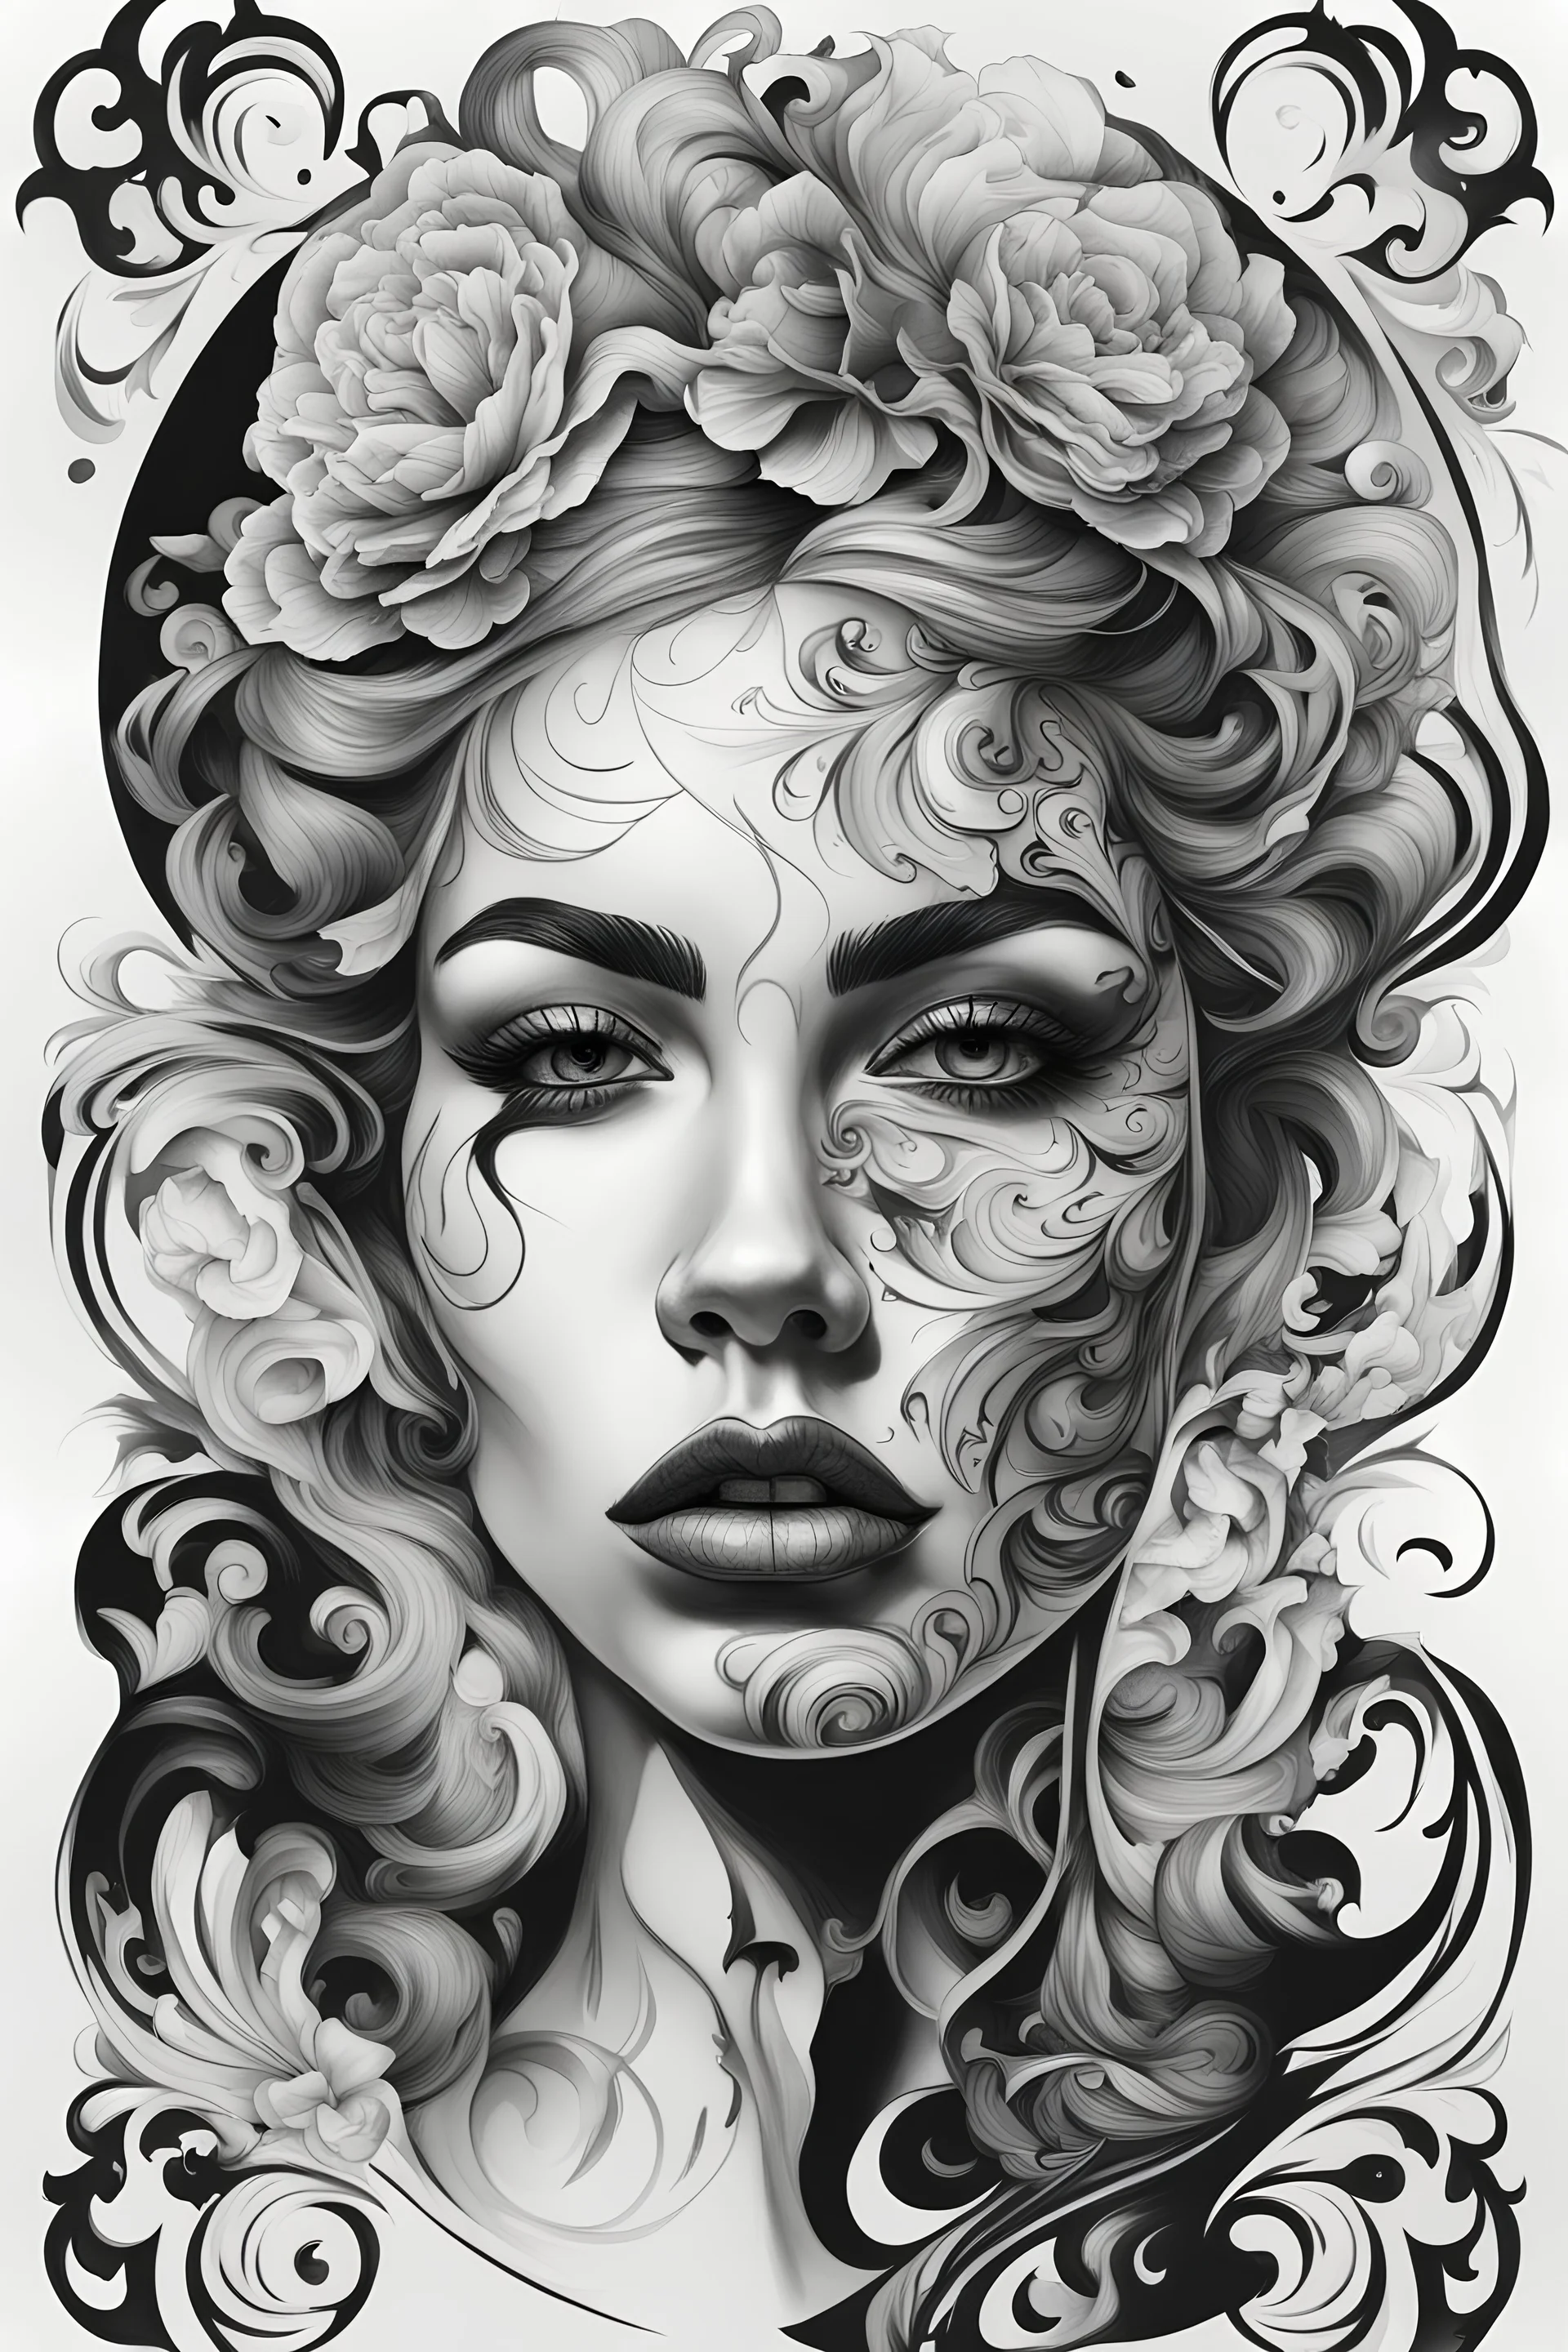 A realistic drawing in negative space black ink on white background of a beautiful women with abstract brushstrokes face tattoos to enhance her face in a mirror baroque with very defined and correct details